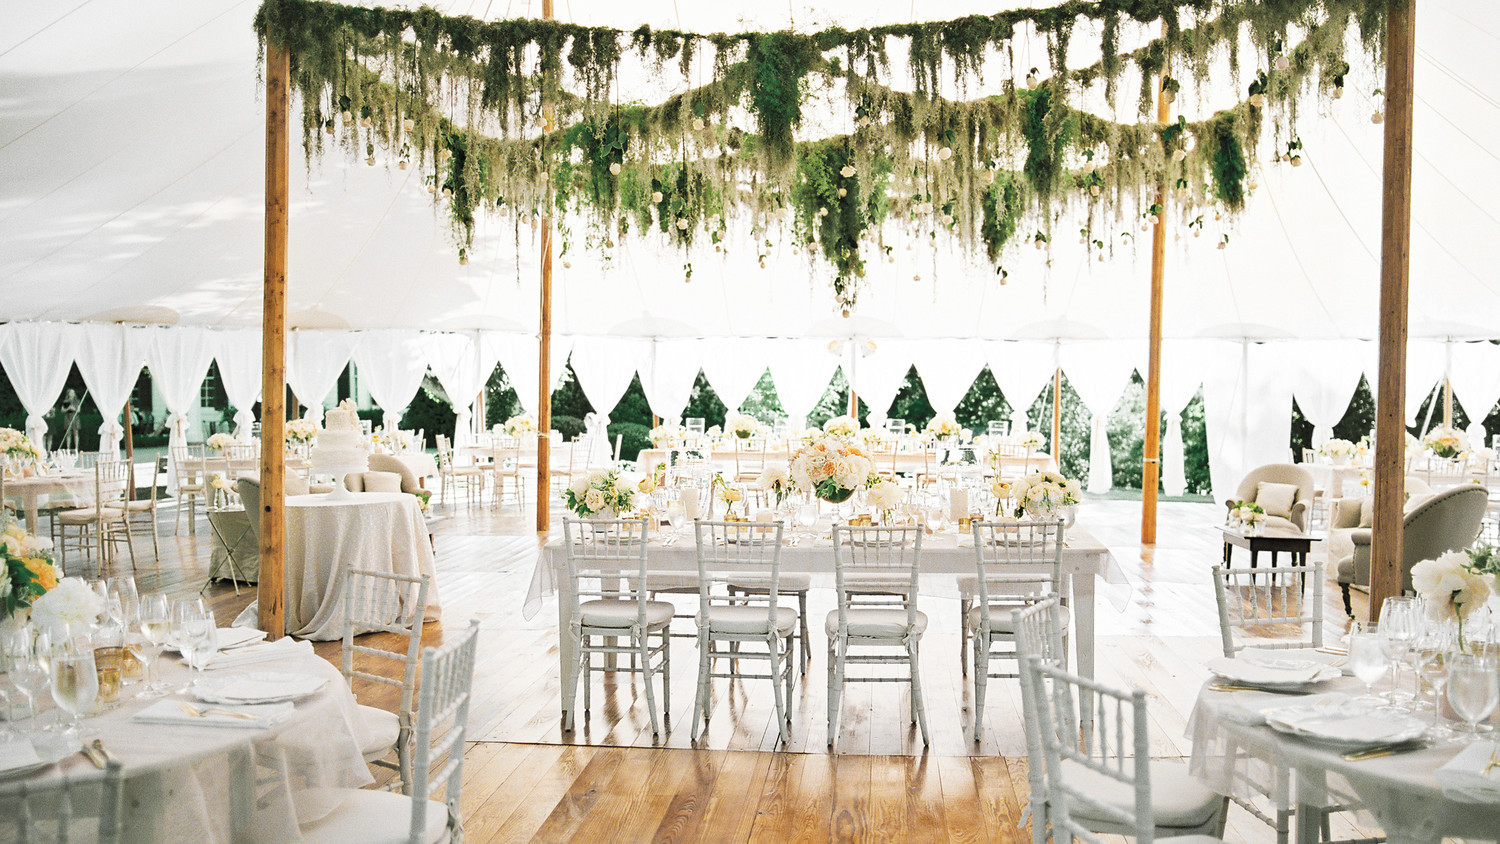 Decorating For Wedding Reception
 28 Tent Decorating Ideas That Will Upgrade Your Wedding